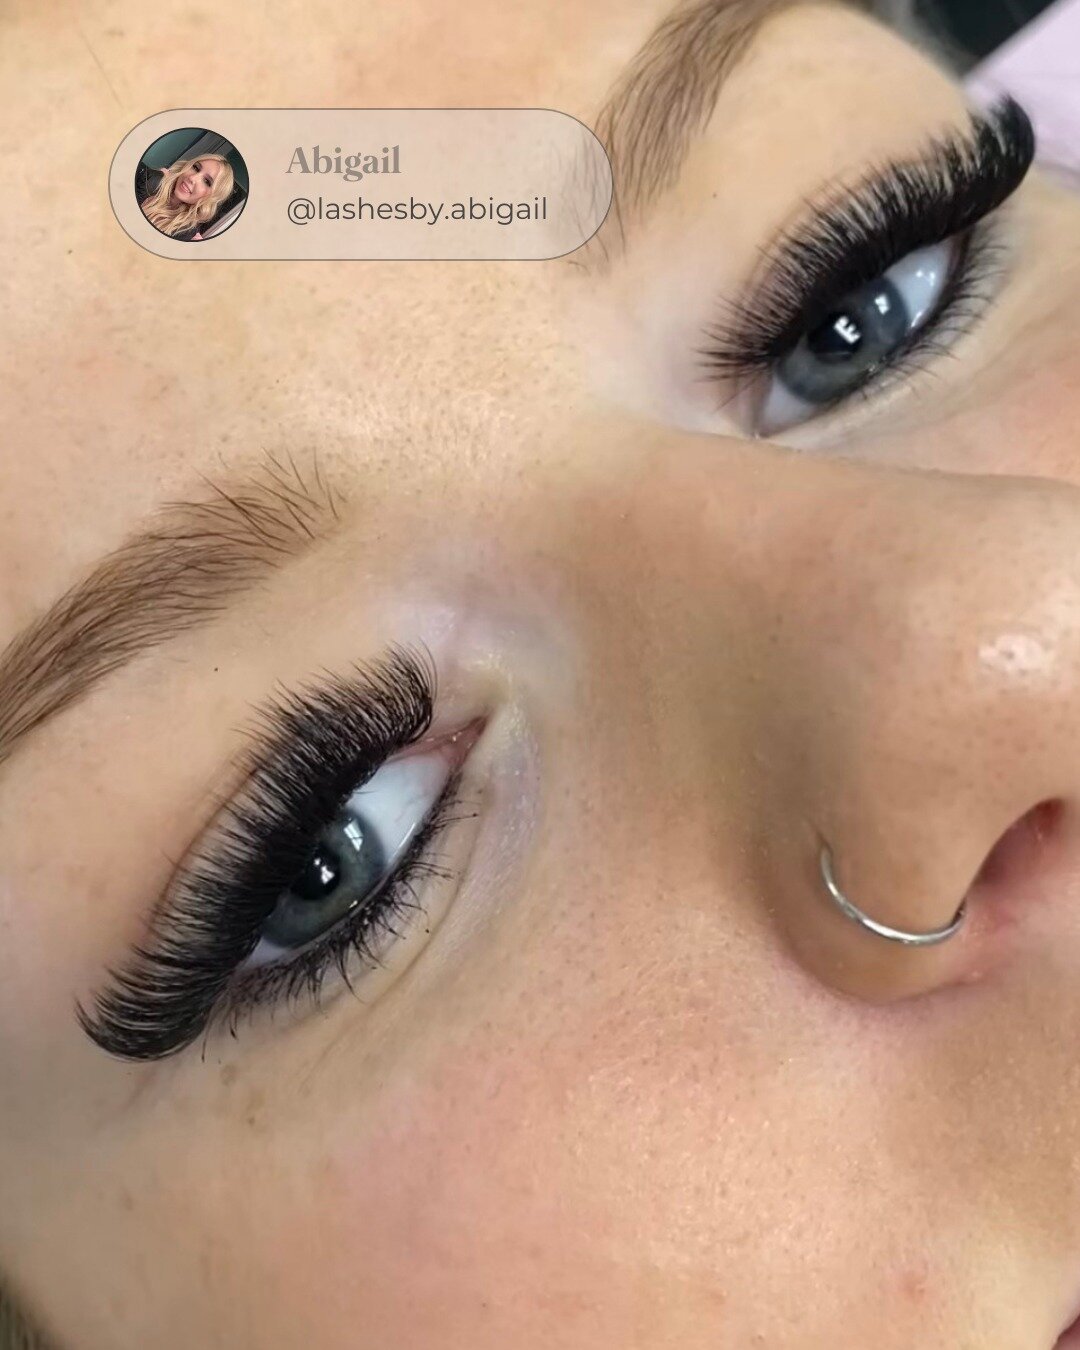 Abigail, our talented new lash artist from Tri-Cities, is here to make your lash dreams come true. For a limited time, enjoy $20 off any full set until October 31st! 👁️💫 Discount applied at checkout.